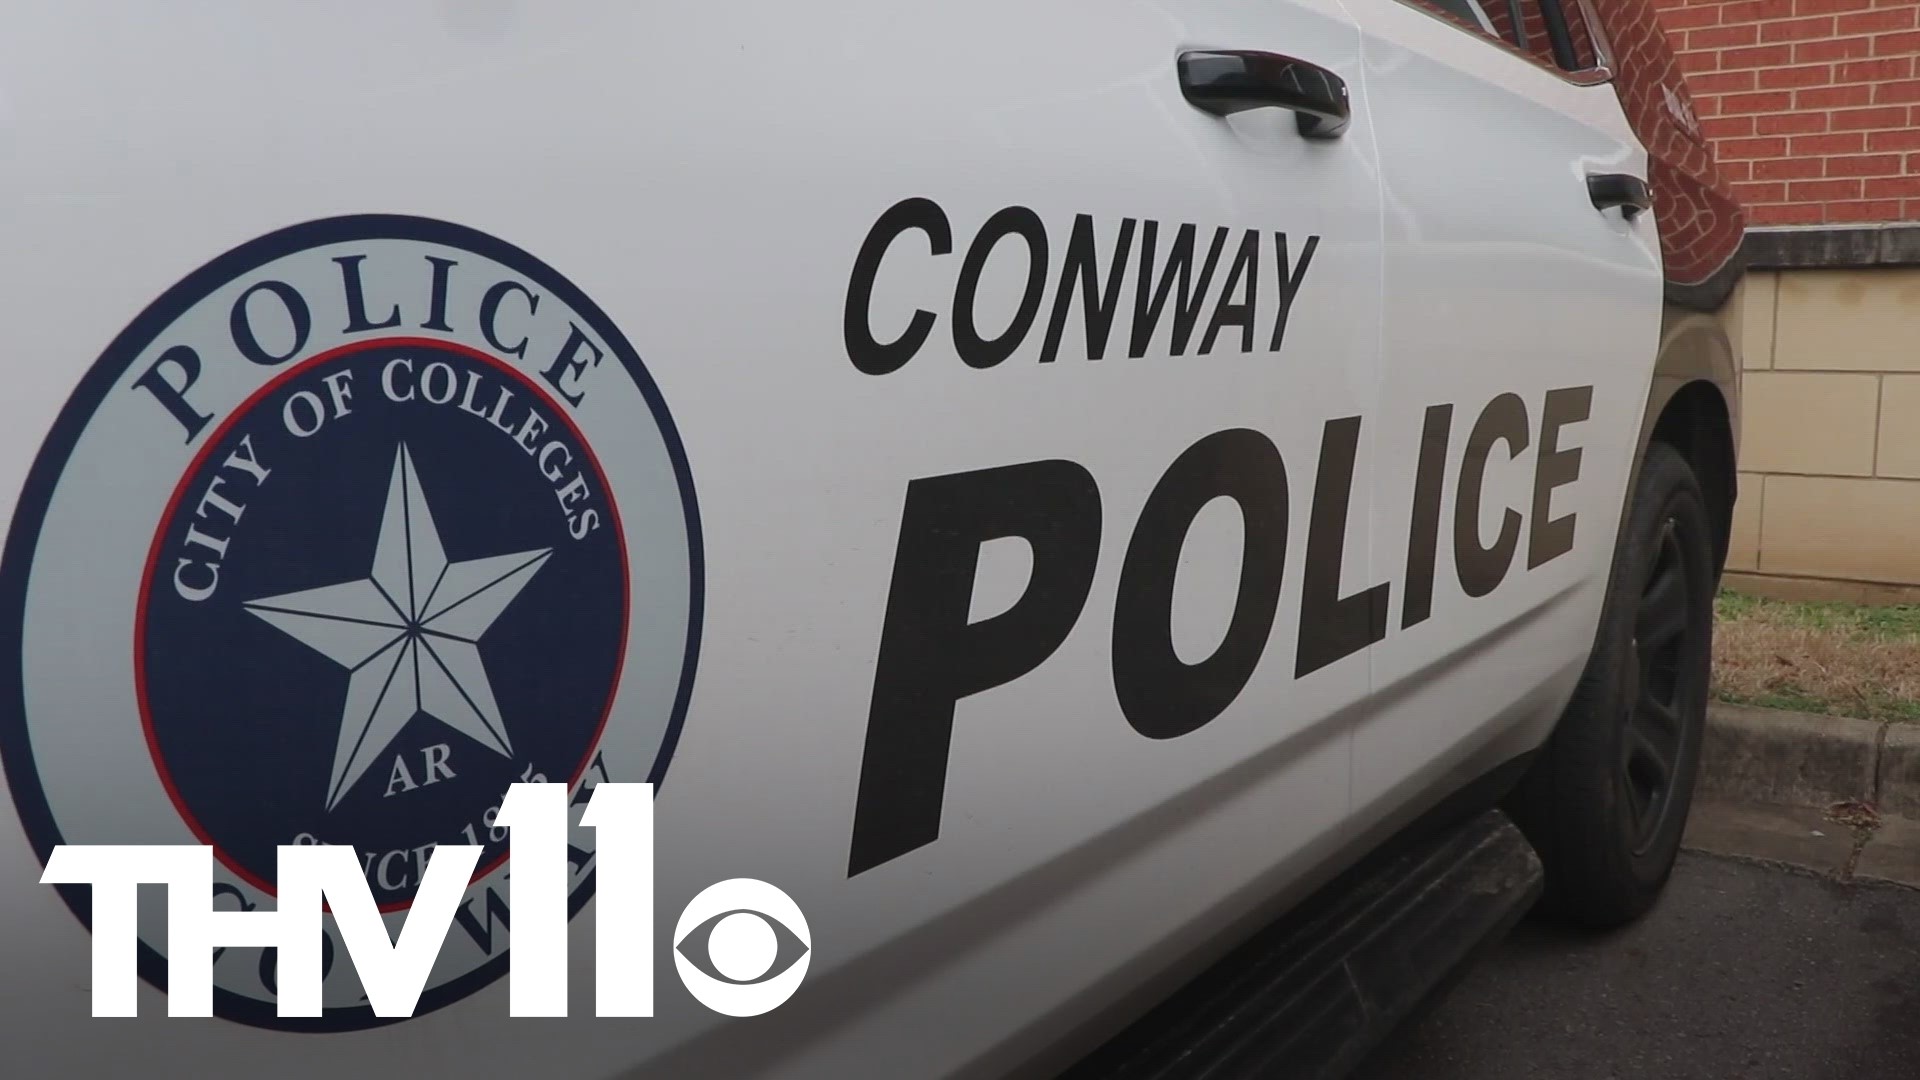 Police have now made an arrest after a man shot at someone multiple times while at a restaurant in Conway.